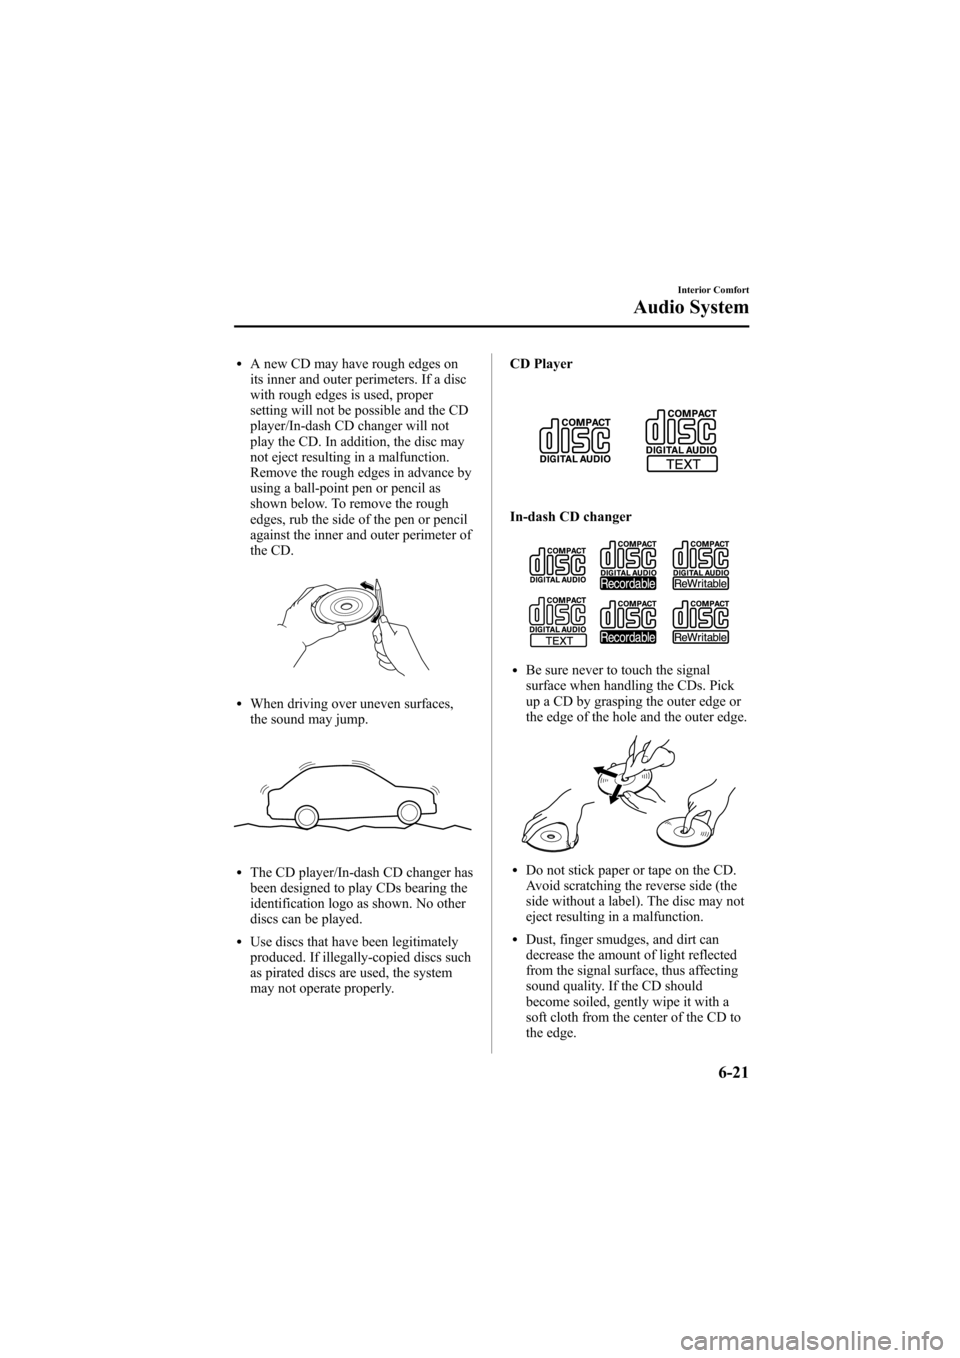 MAZDA MODEL 6 2007  Owners Manual (in English) Black plate (203,1)
lA new CD may have rough edges on
its inner and outer perimeters. If a disc
with rough edges is used, proper
setting will not be possible and the CD
player/In-dash CD changer will 